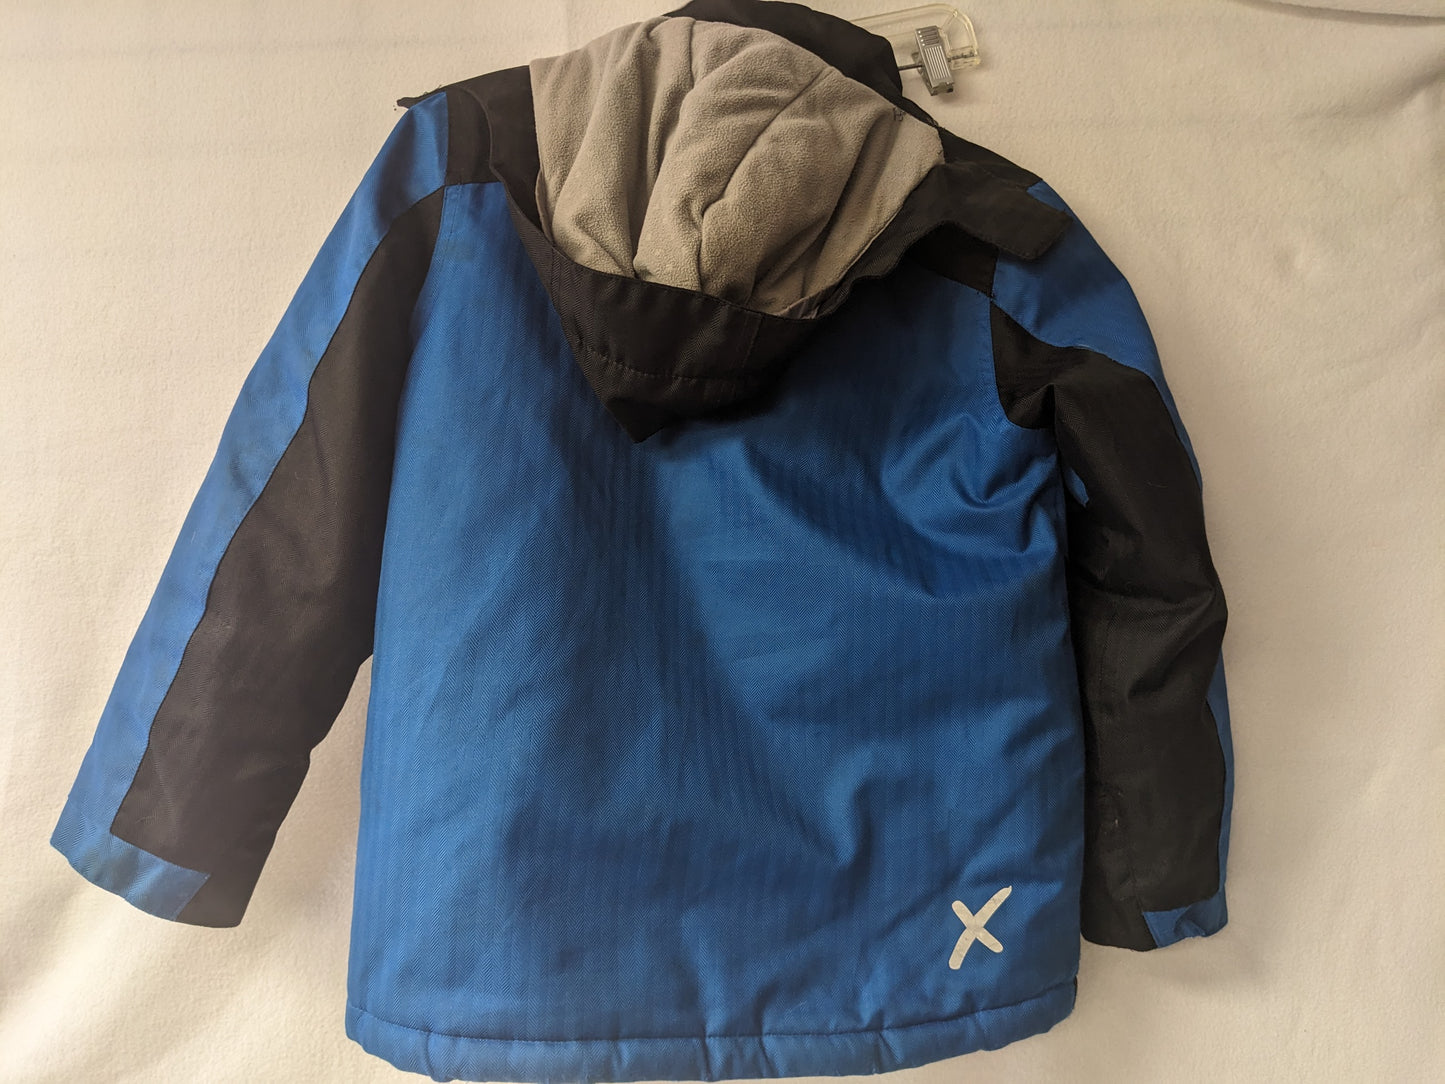 XMtn Hooded Insulated Ski/Snowboard Jacket Coat Size Small Color Blue Condition Used